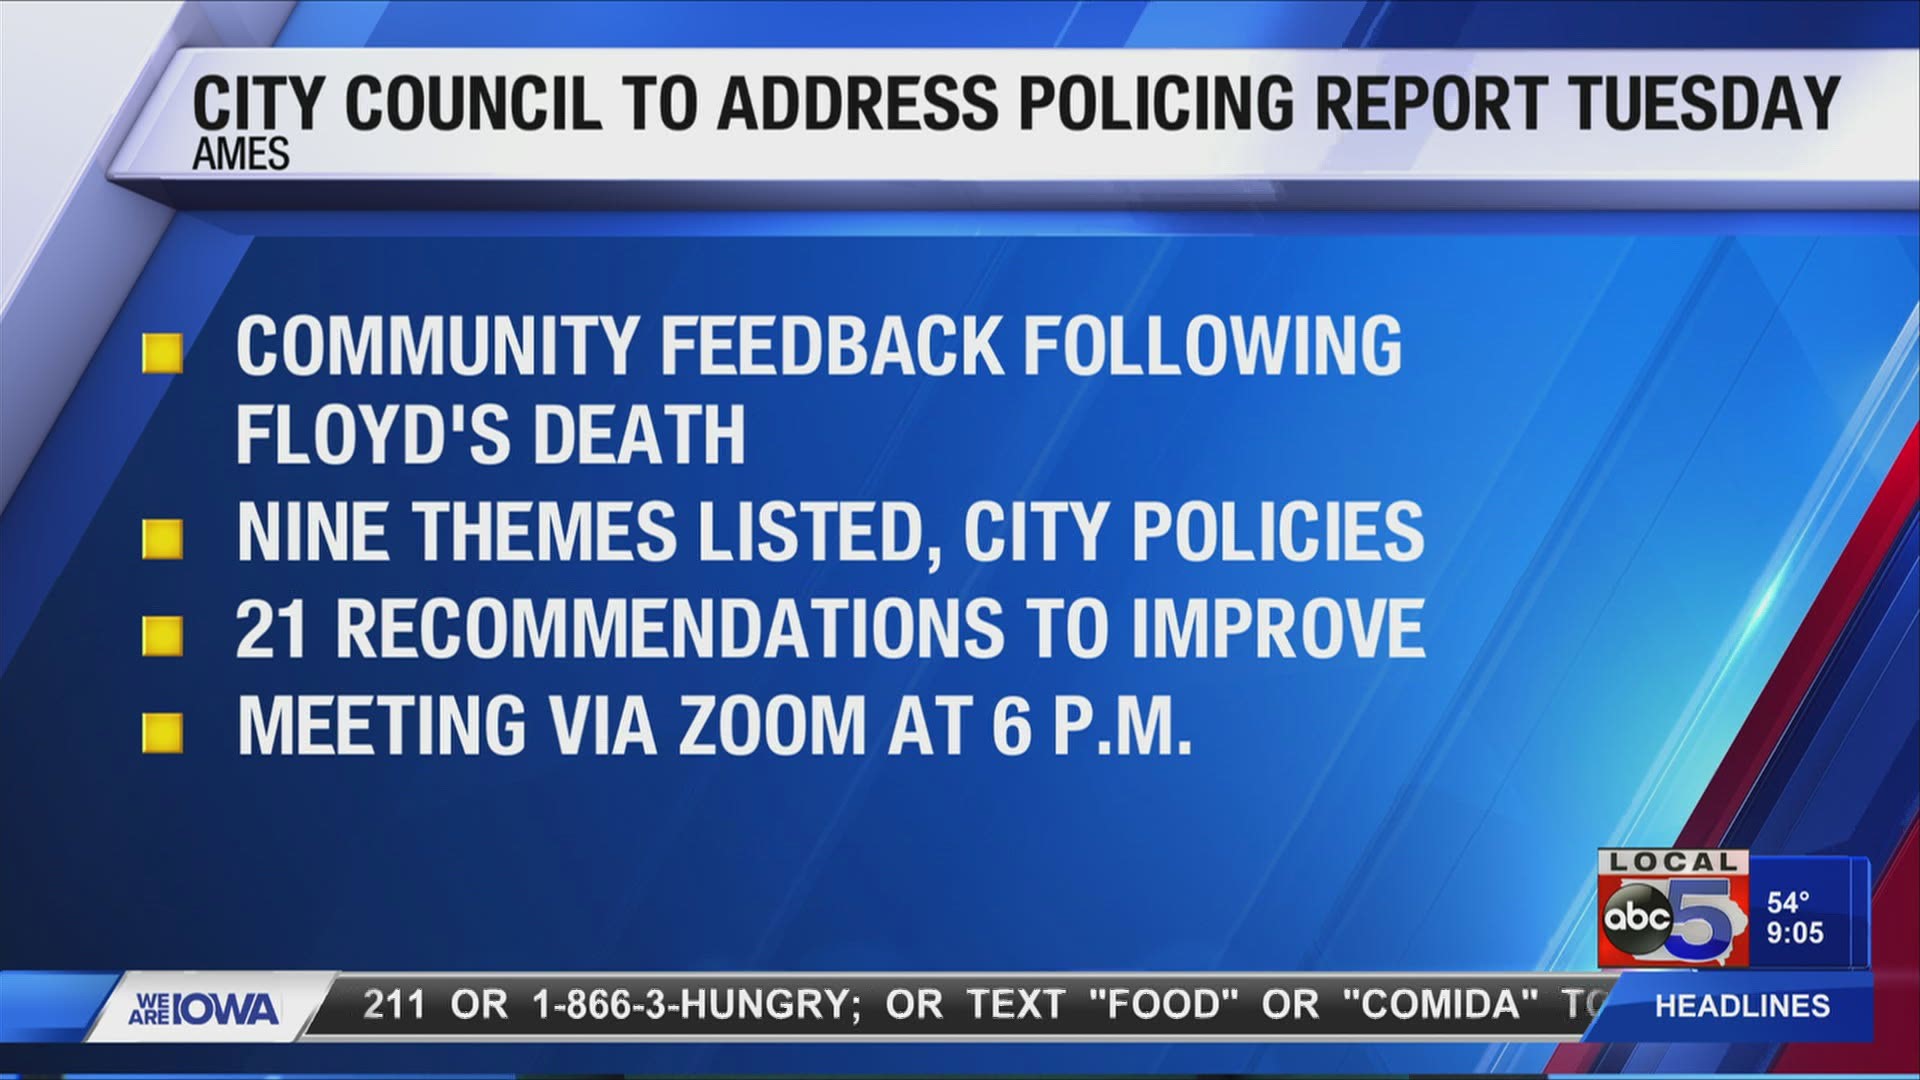 Ames City Council will go over the report and its recommendations during their Tuesday meeting.